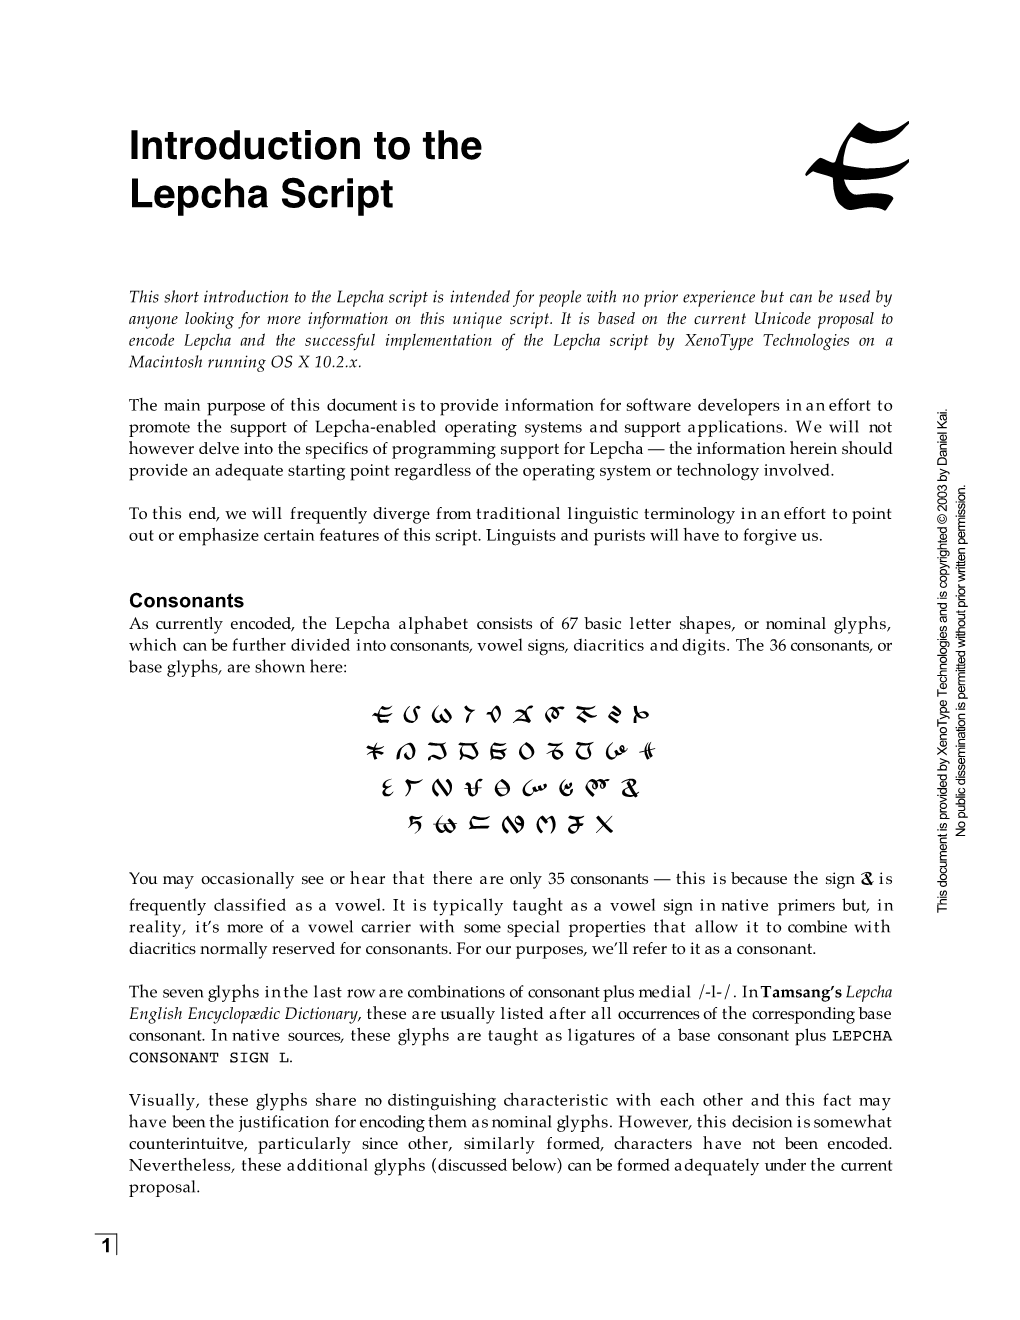 Introduction to the Lepcha Script 